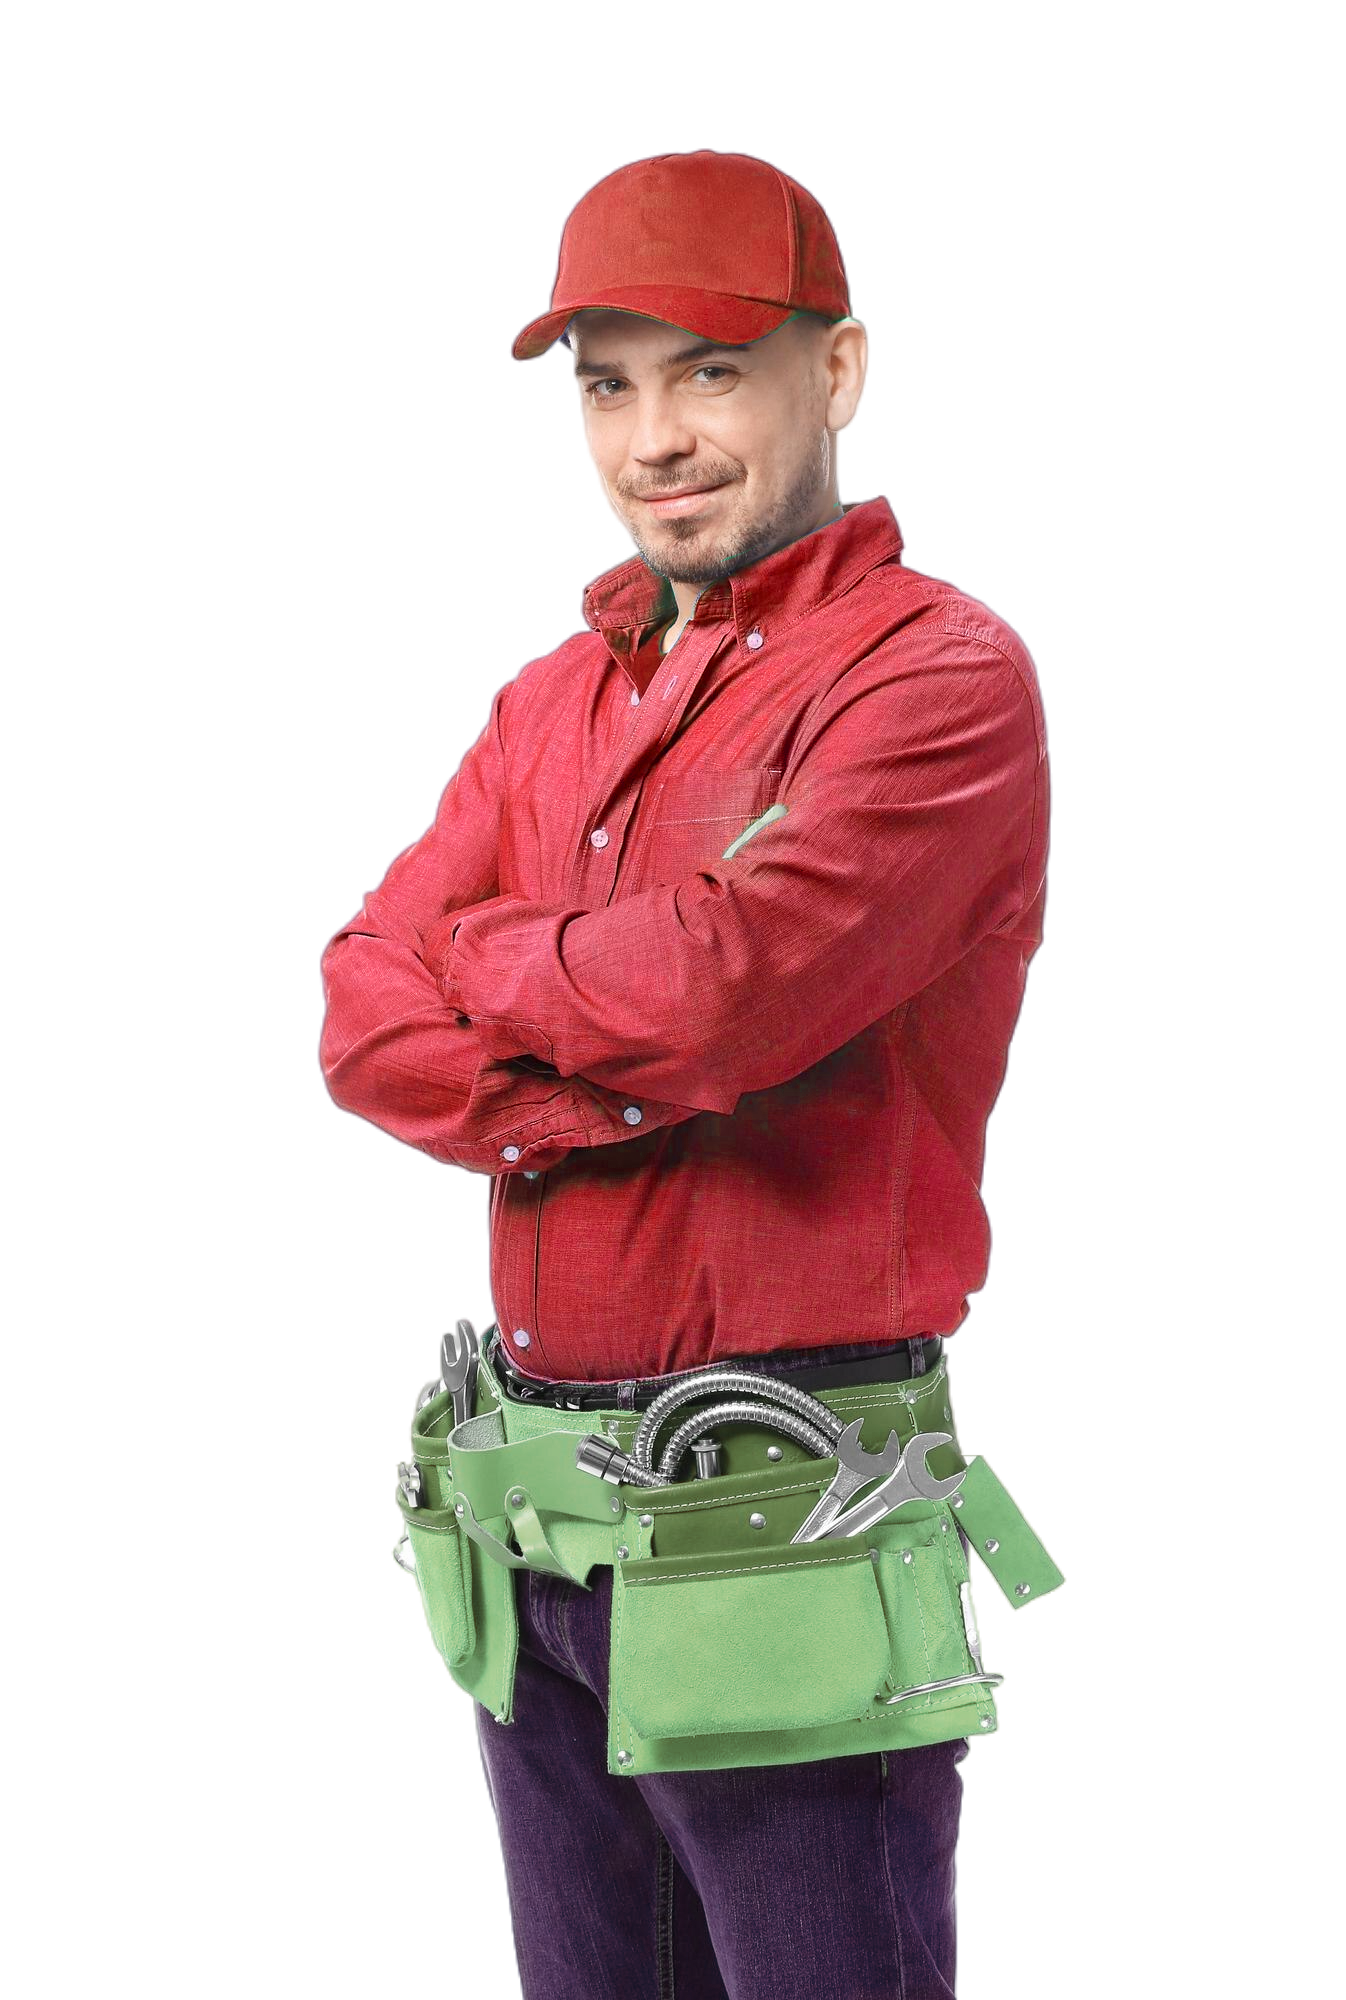 plumber-with-tool-belt-white-background